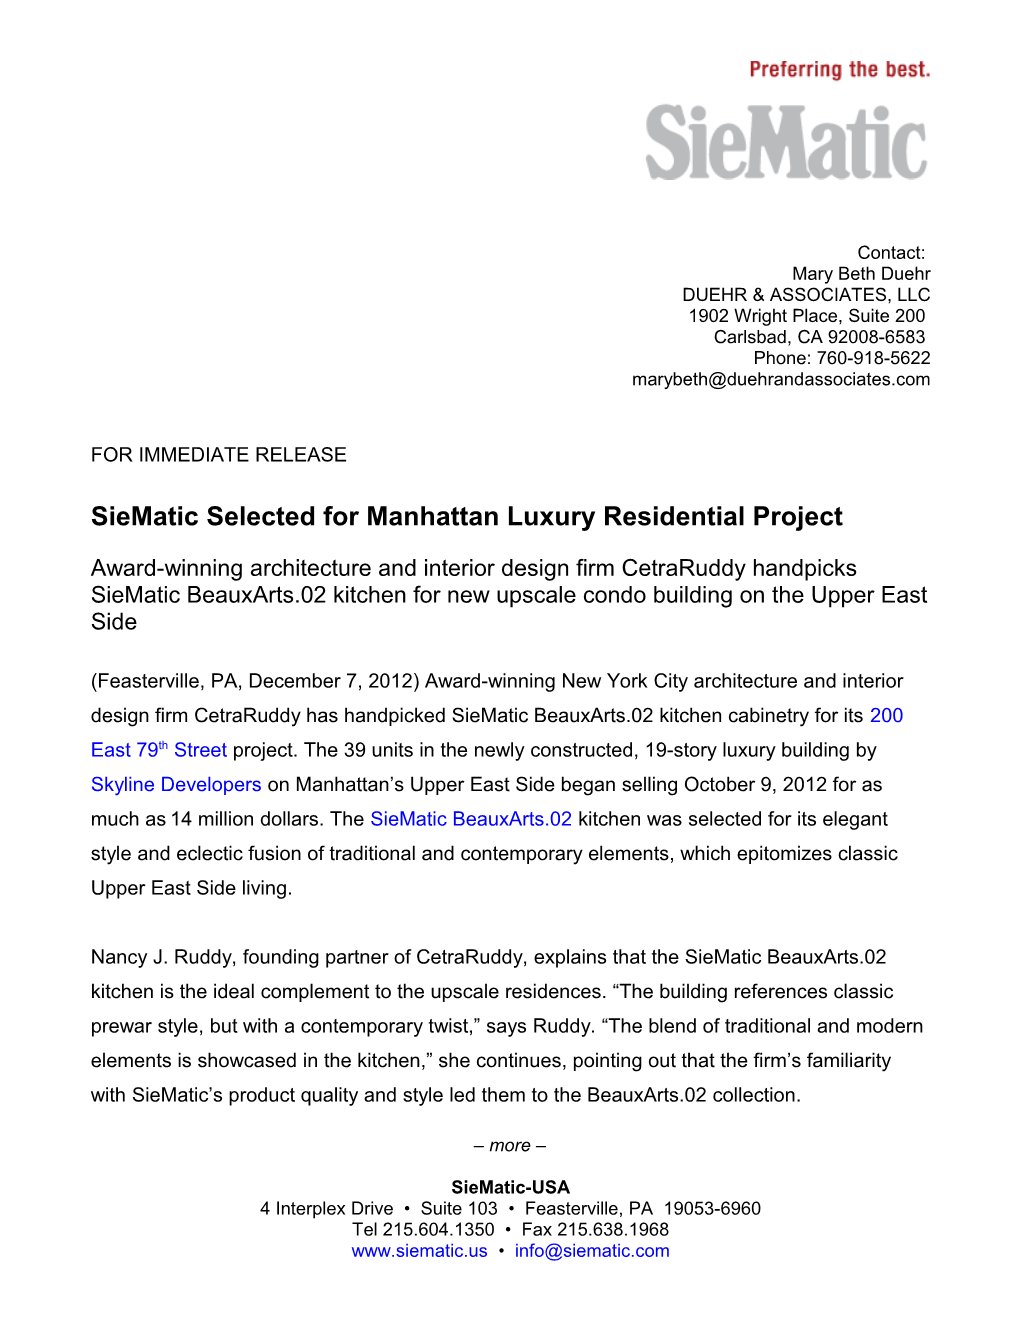 Siematic Selected for Manhattan Luxury Residential Project